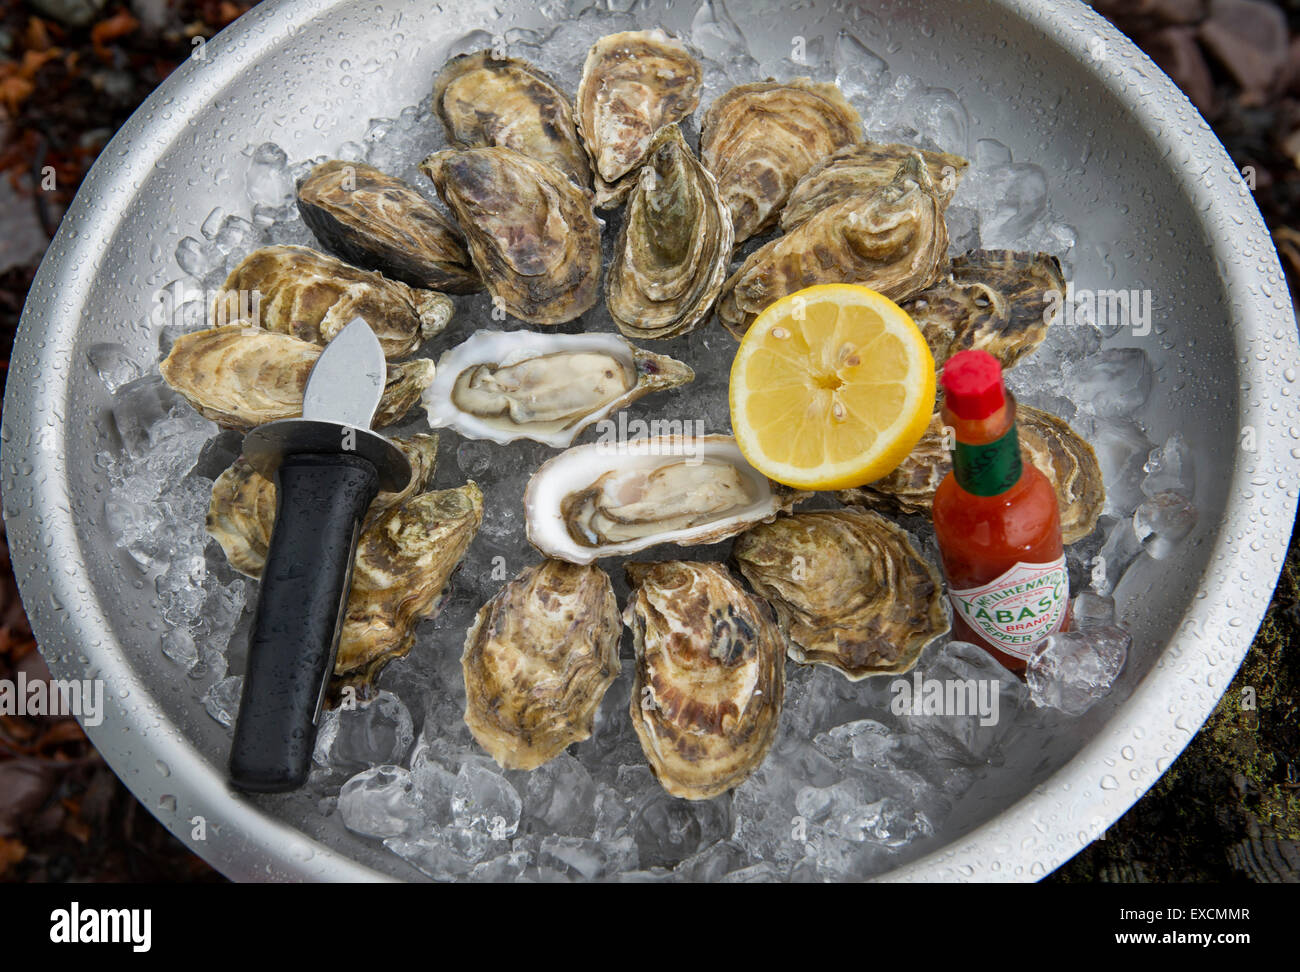 Porlock Bay Oysters which are being bred for the first time in 120 years in Porlock Weir,Somerset,UK.  Alan Wright is one of the owners. Stock Photo